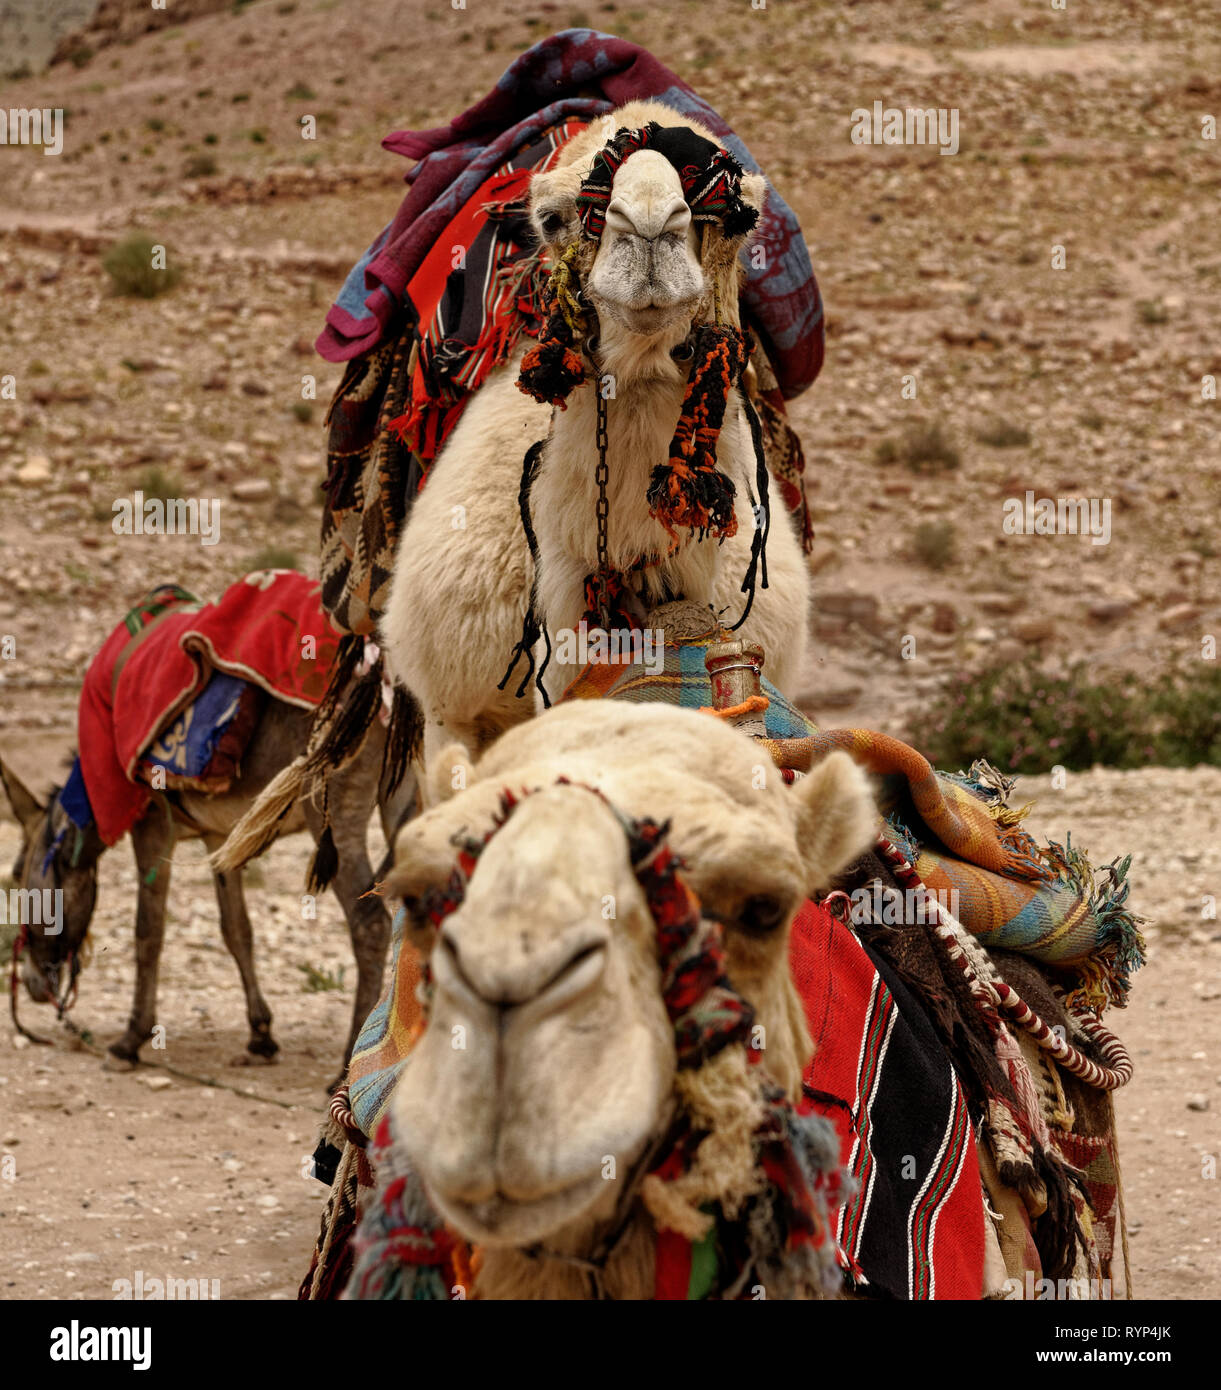 Camels resting in Wadi Rum Stock Photo